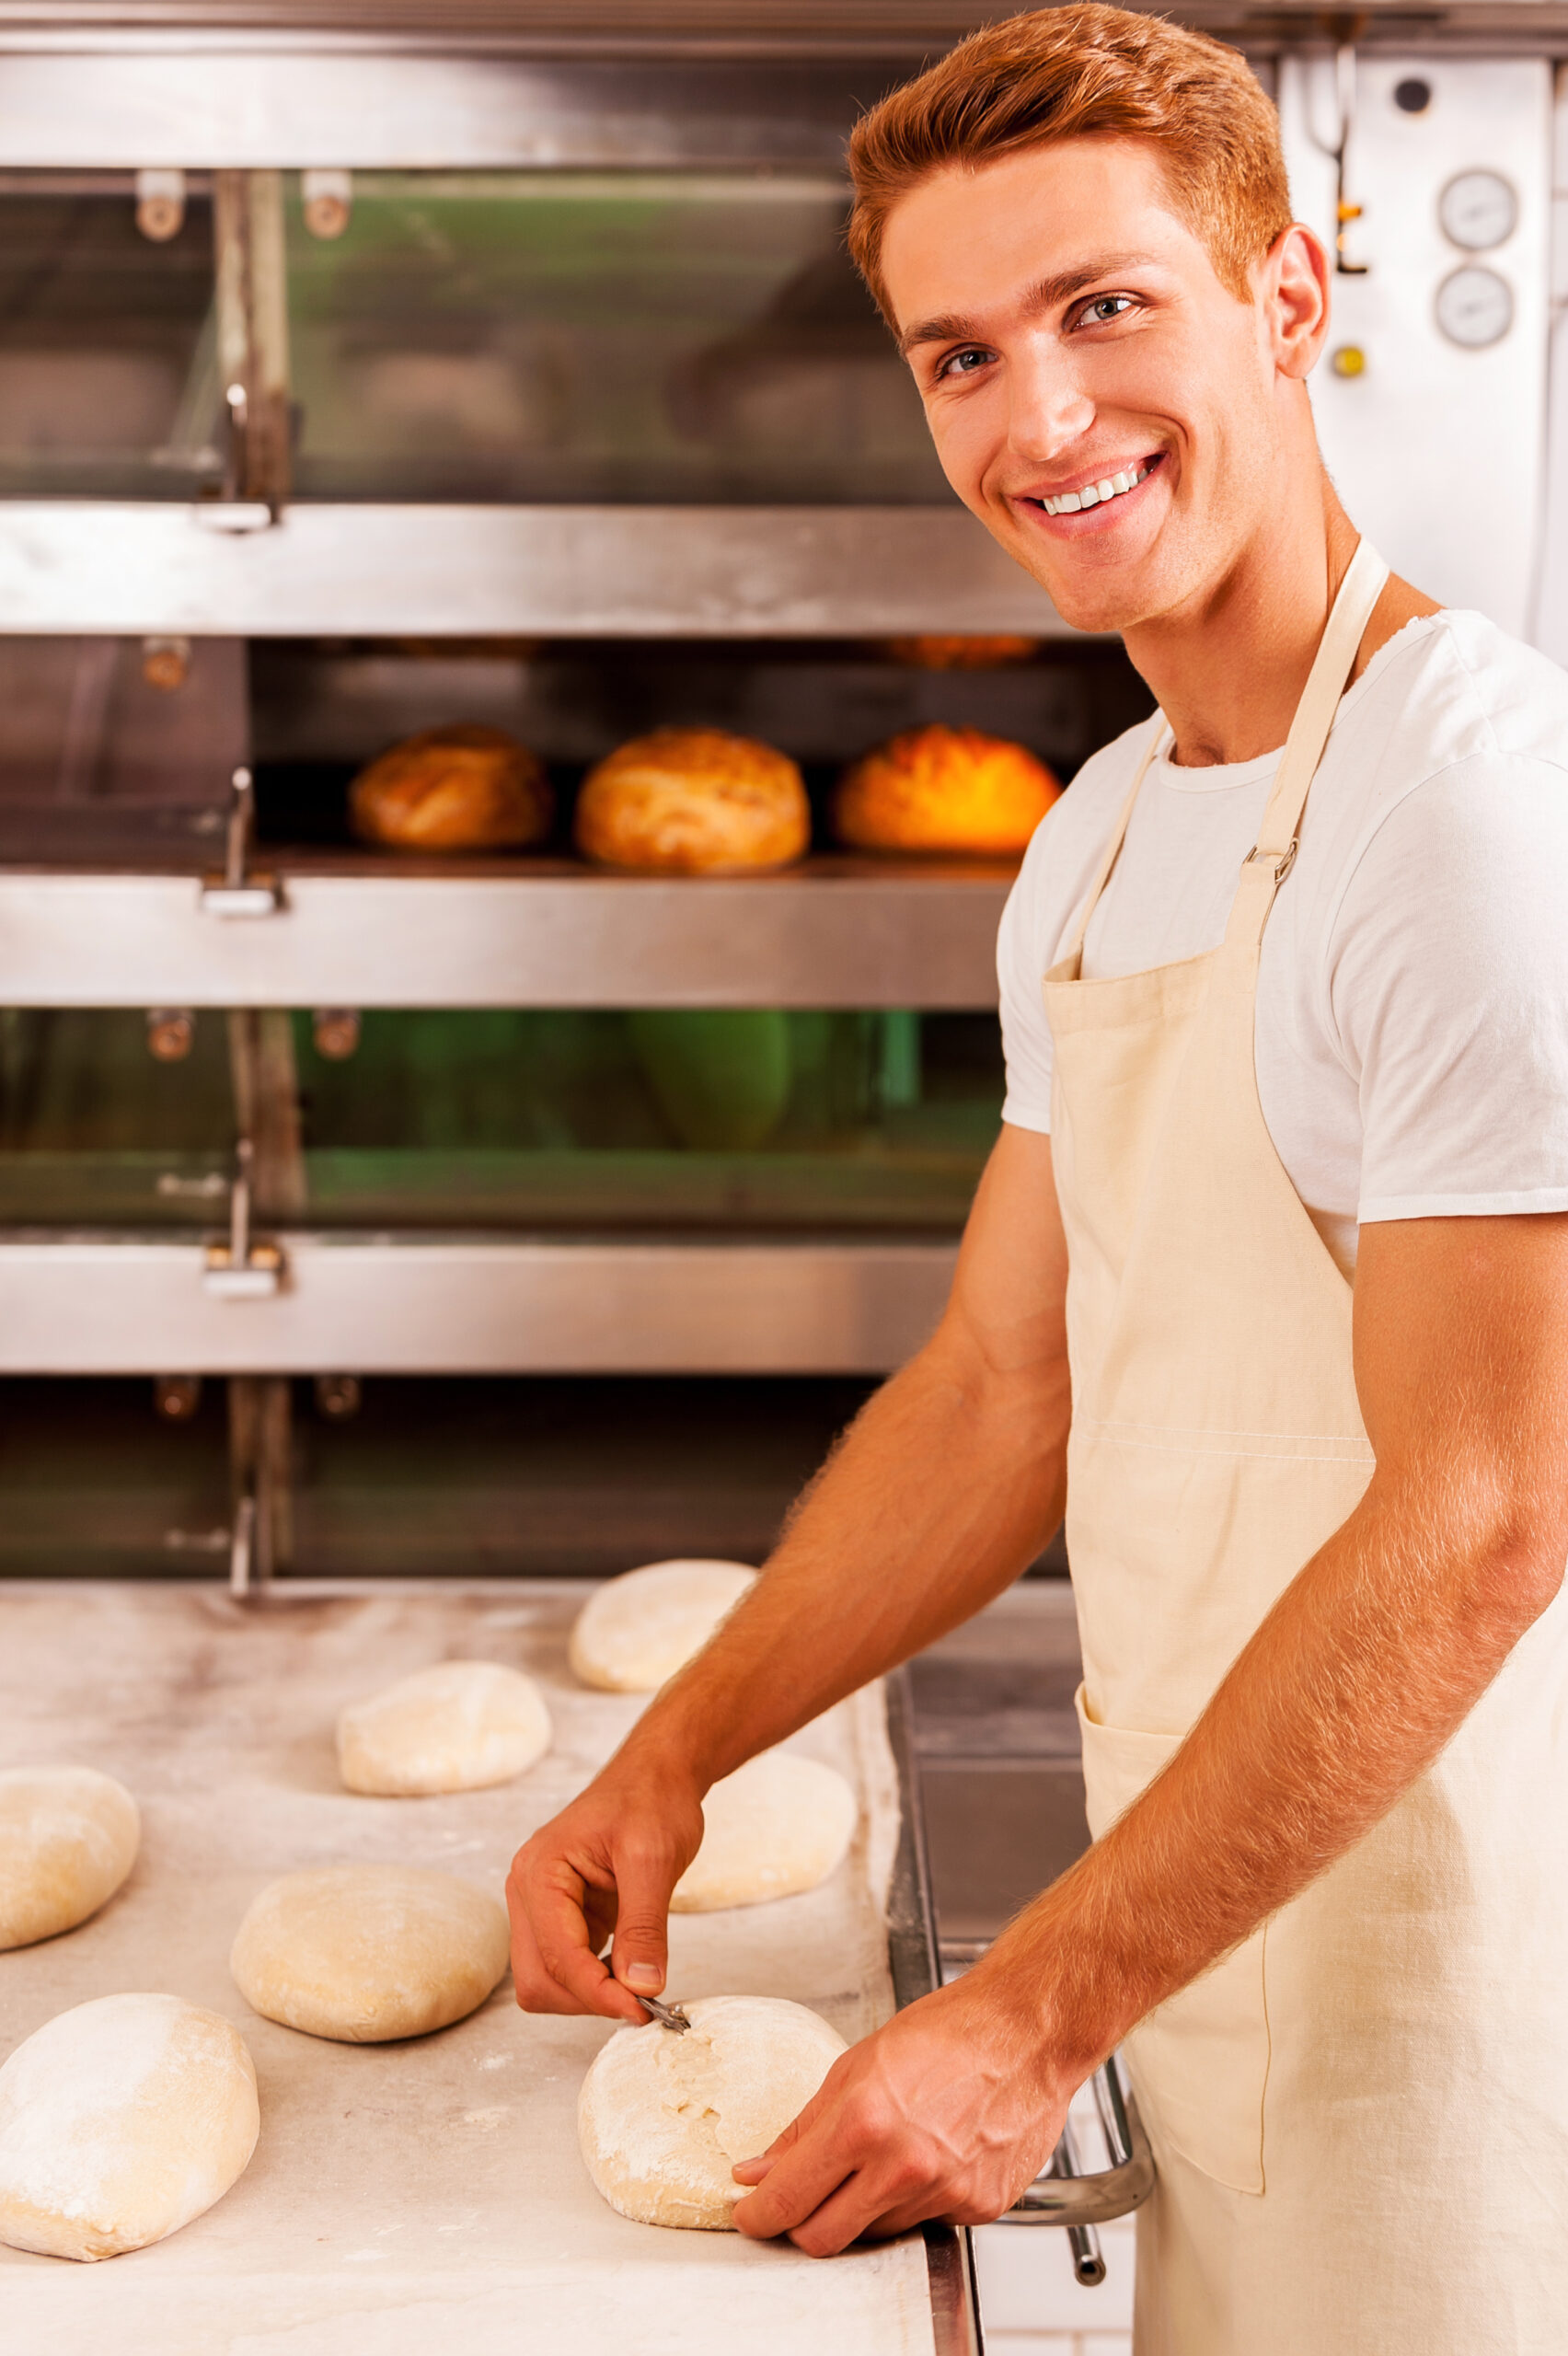 Confident baker at work. Confident young man in apron working with dough and smiling while standing against oven with bread in it